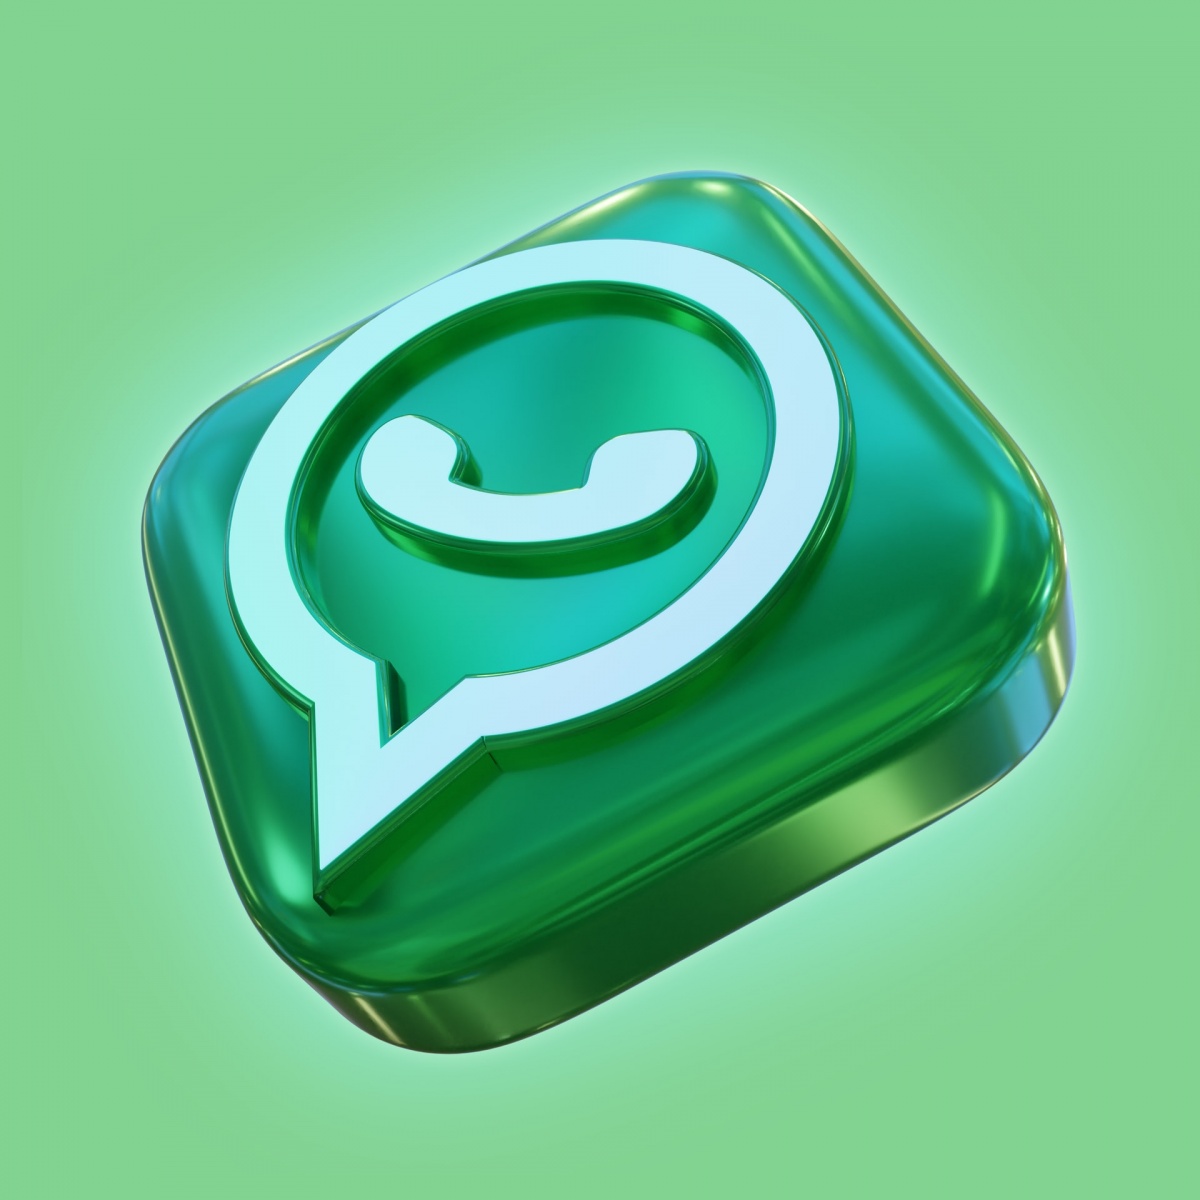 WhatsApp iOS New Features: Reactions and Group Polls